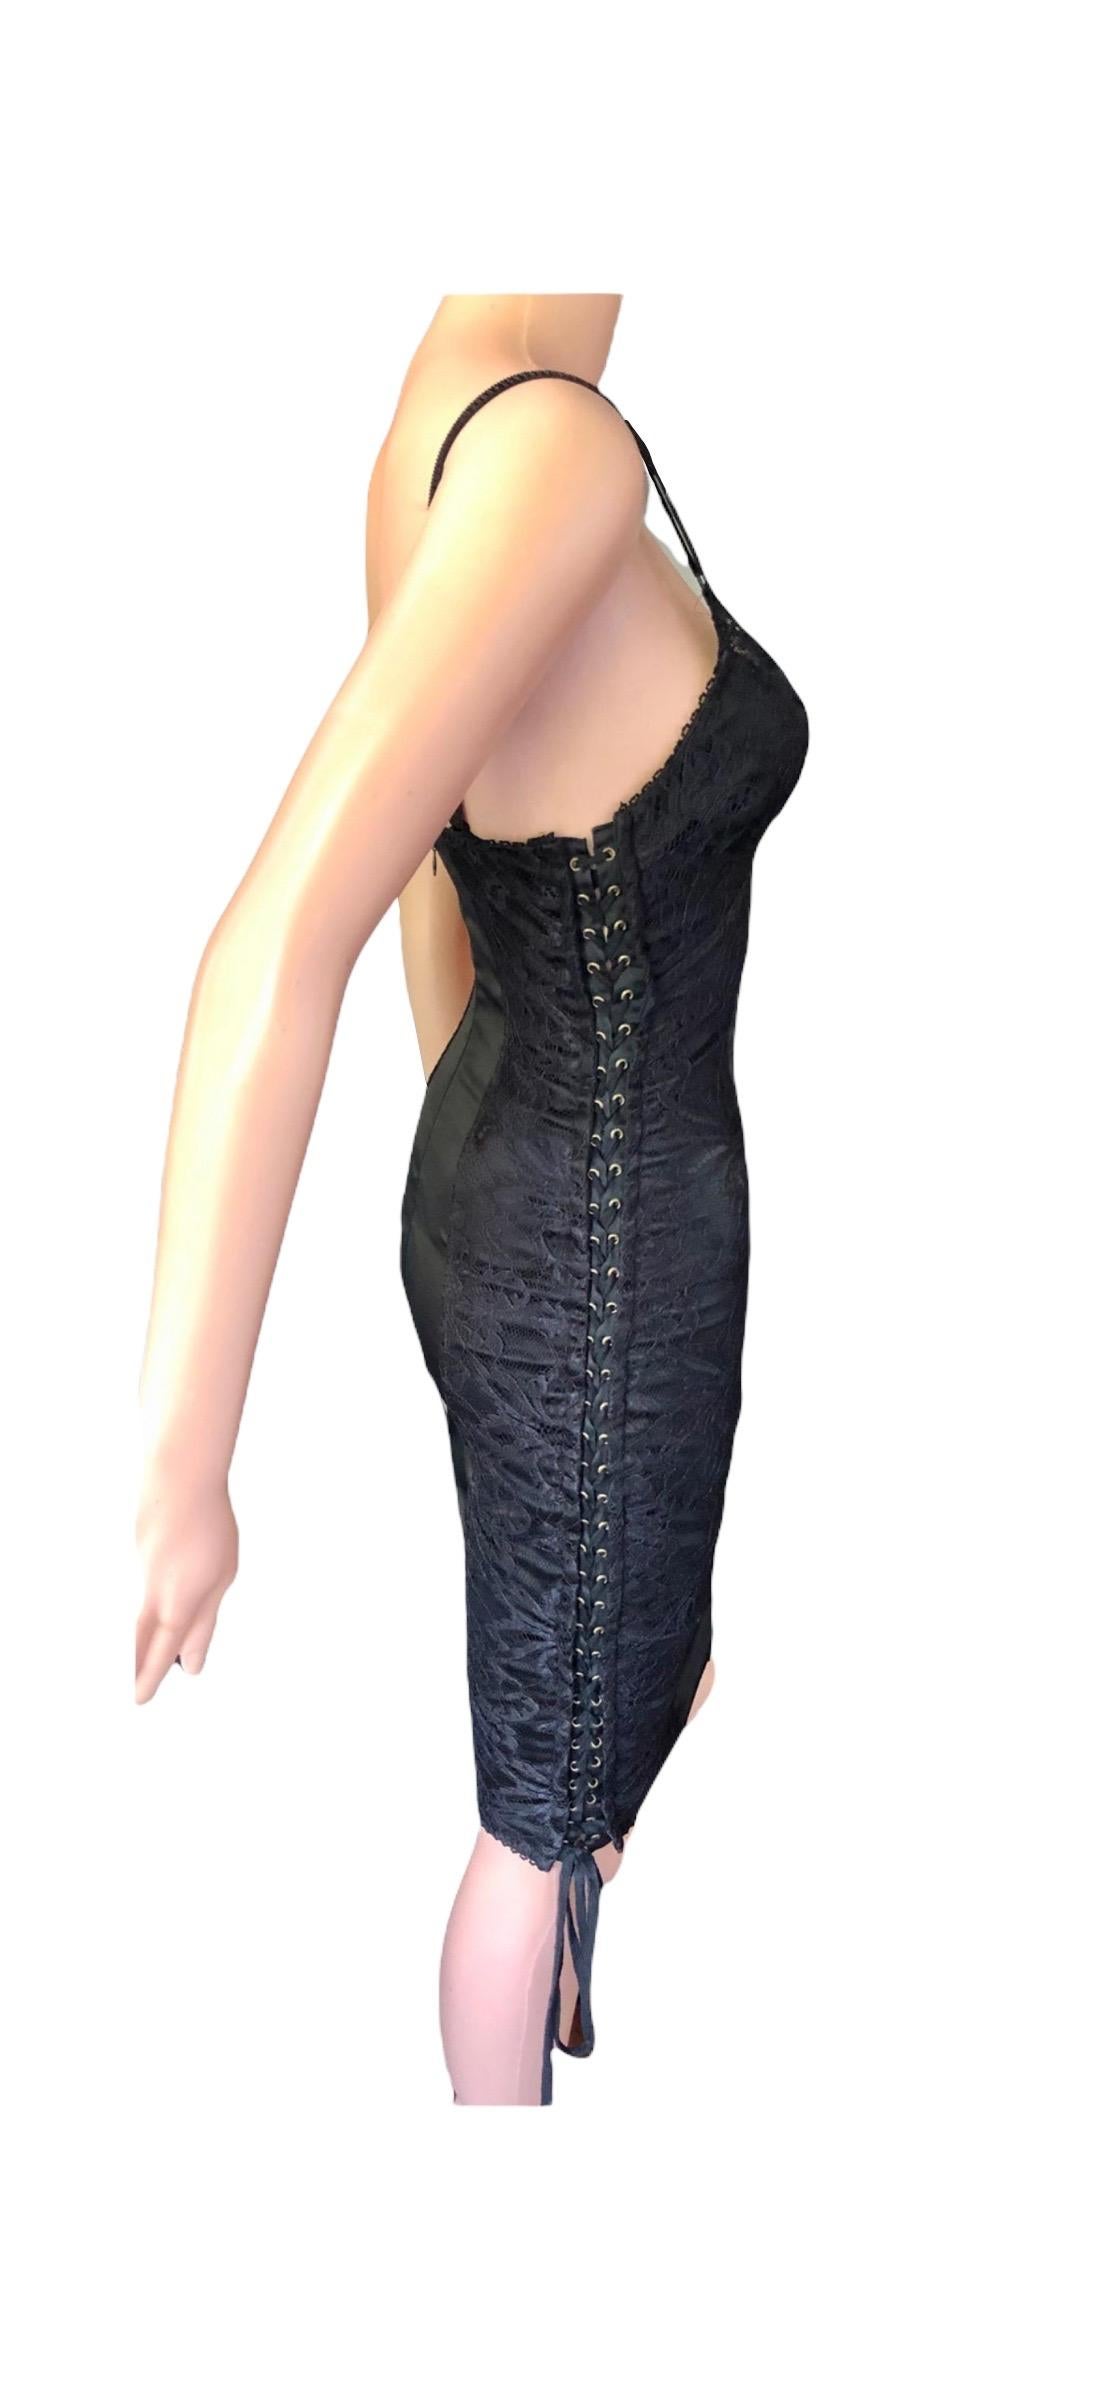 D&G by Dolce & Gabbana Lace Up Bodycon Black Dress For Sale 3